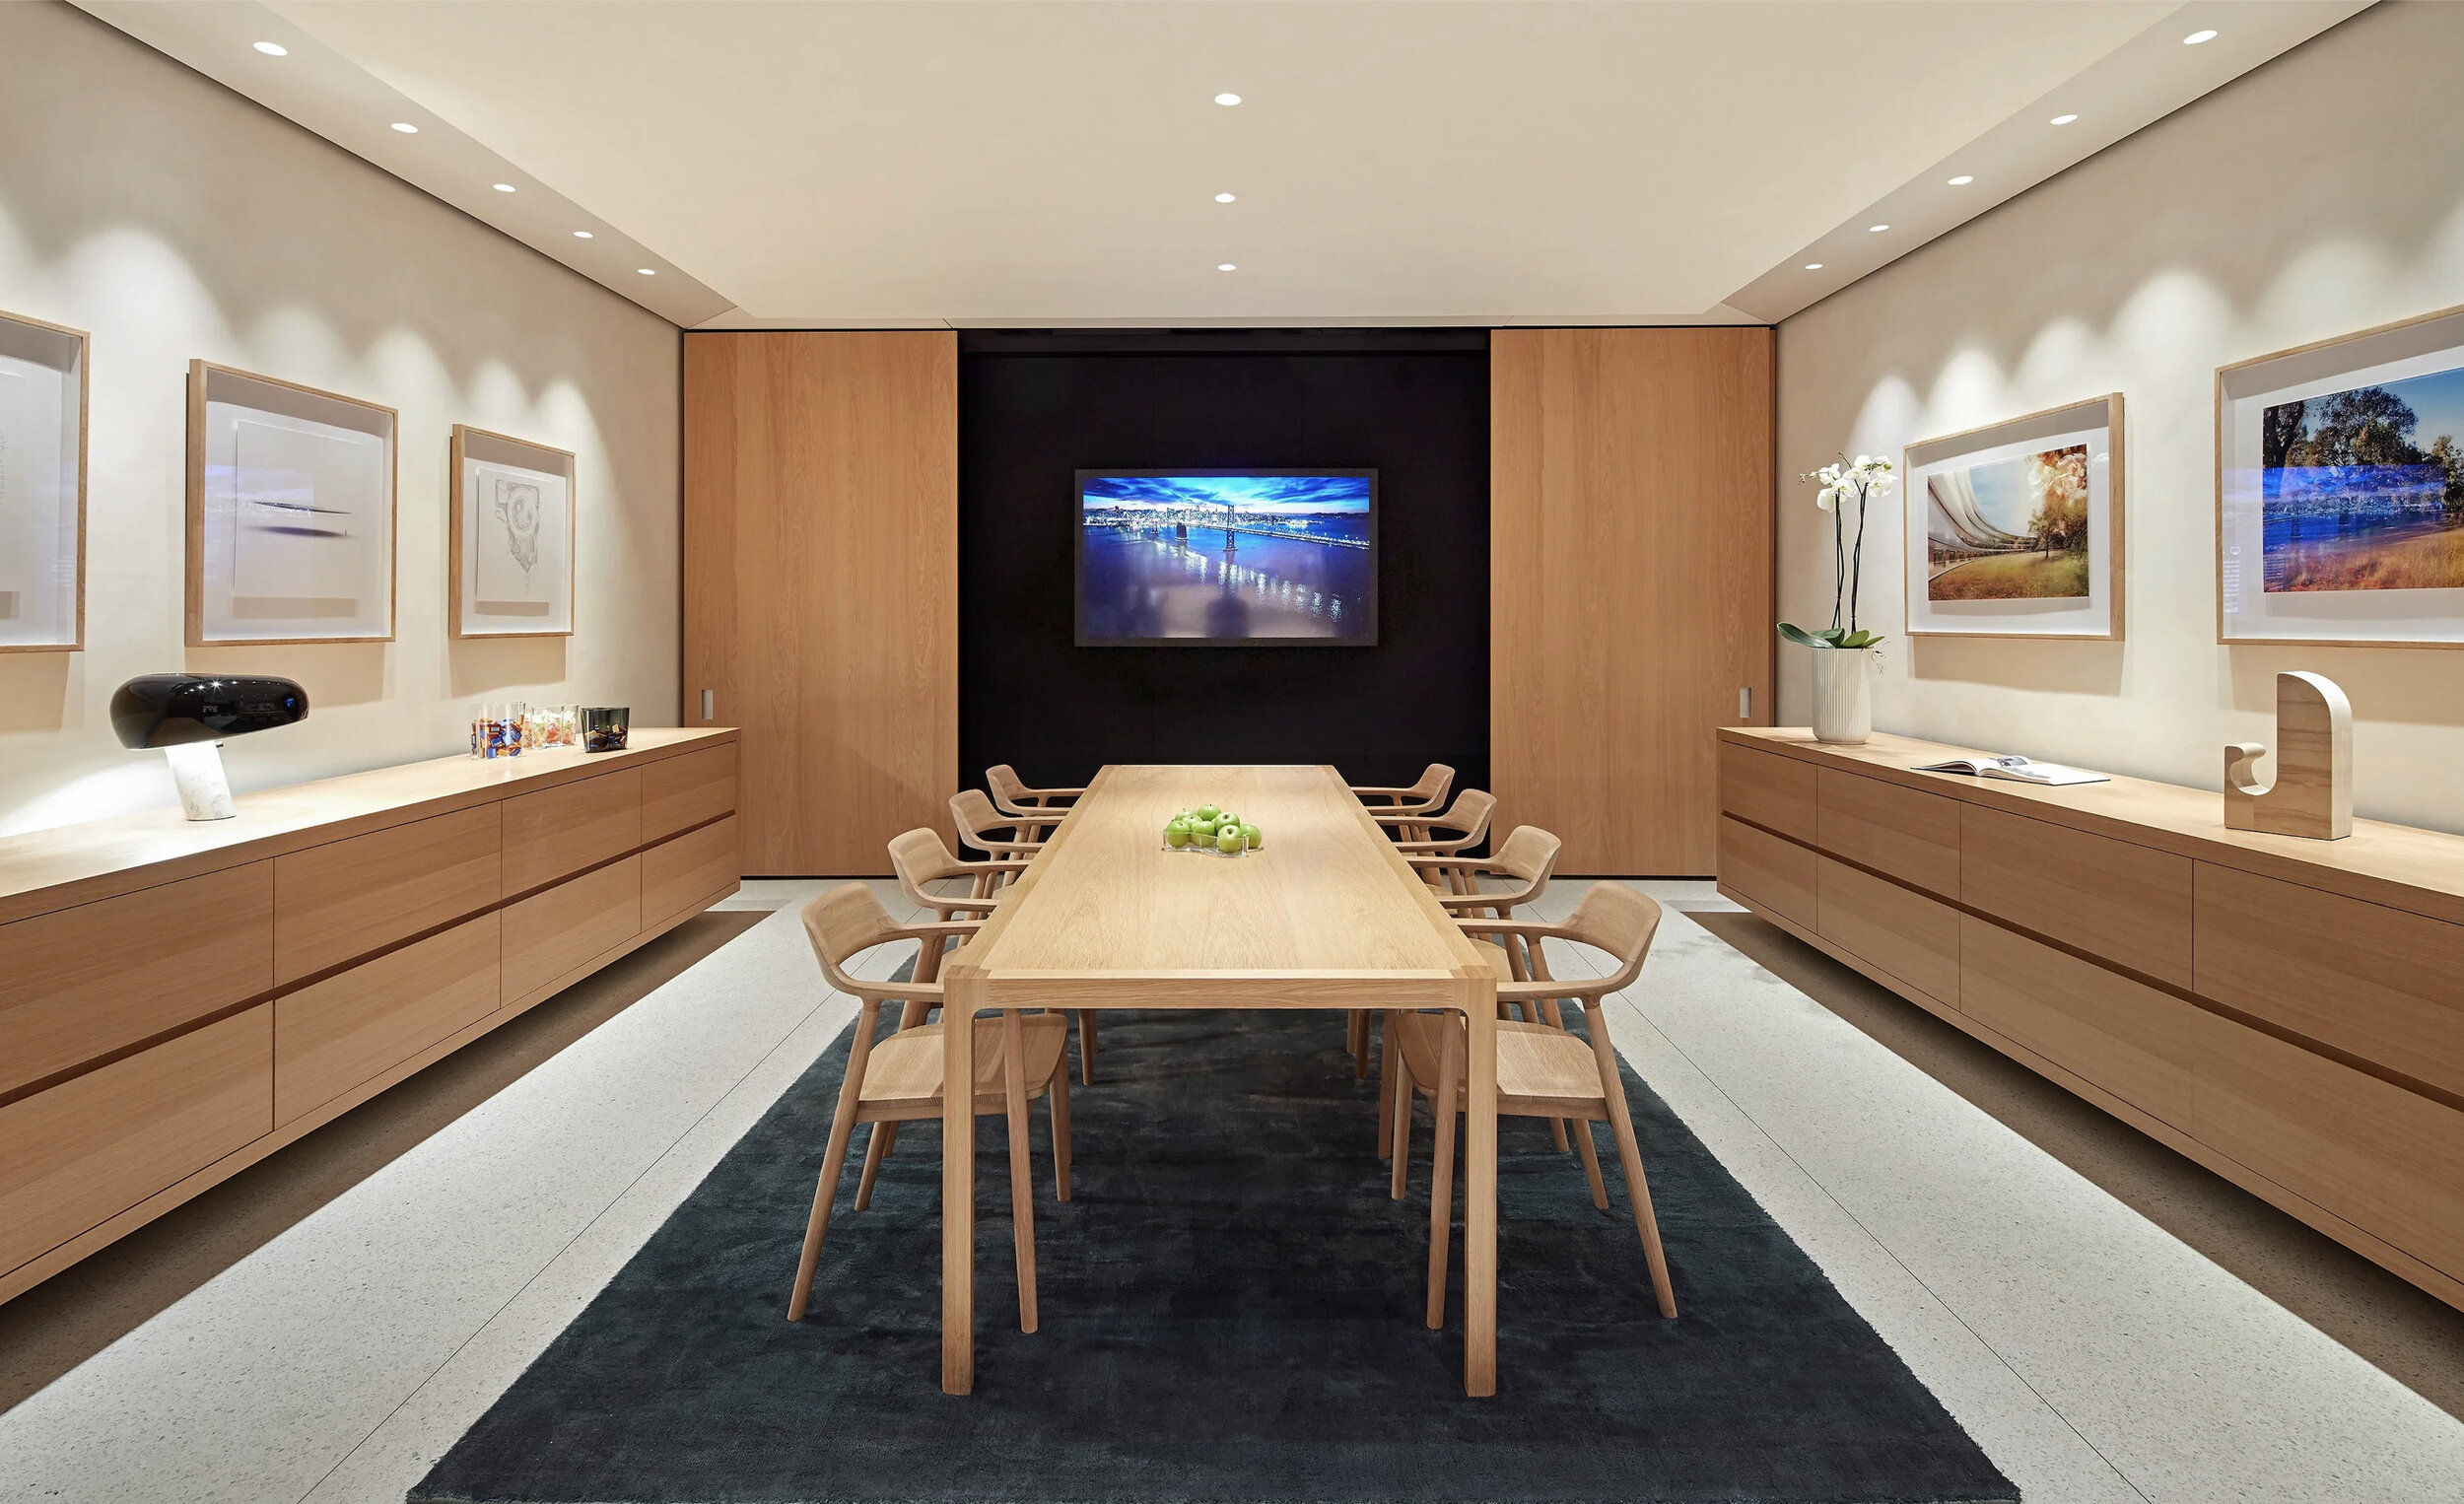 Example of “The Boardroom” in Flagship Stores